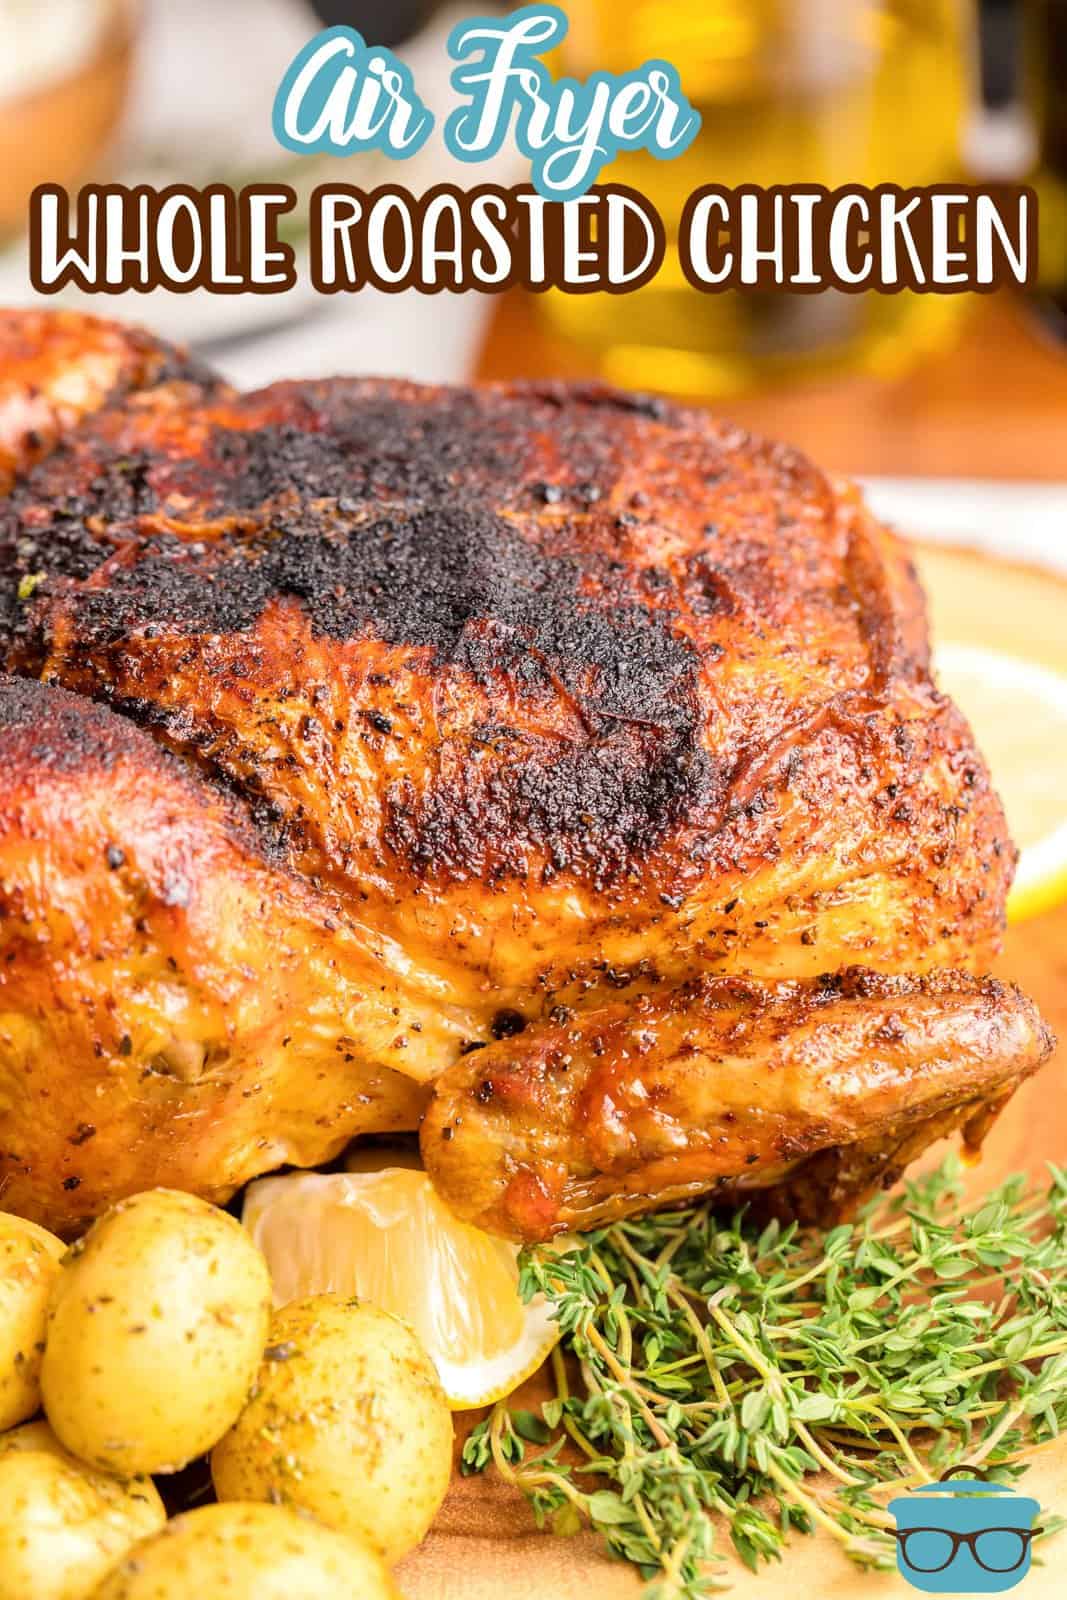 Pinterest image showing Air Fryer Whole Roasted Chicken with potatoes and herbs.